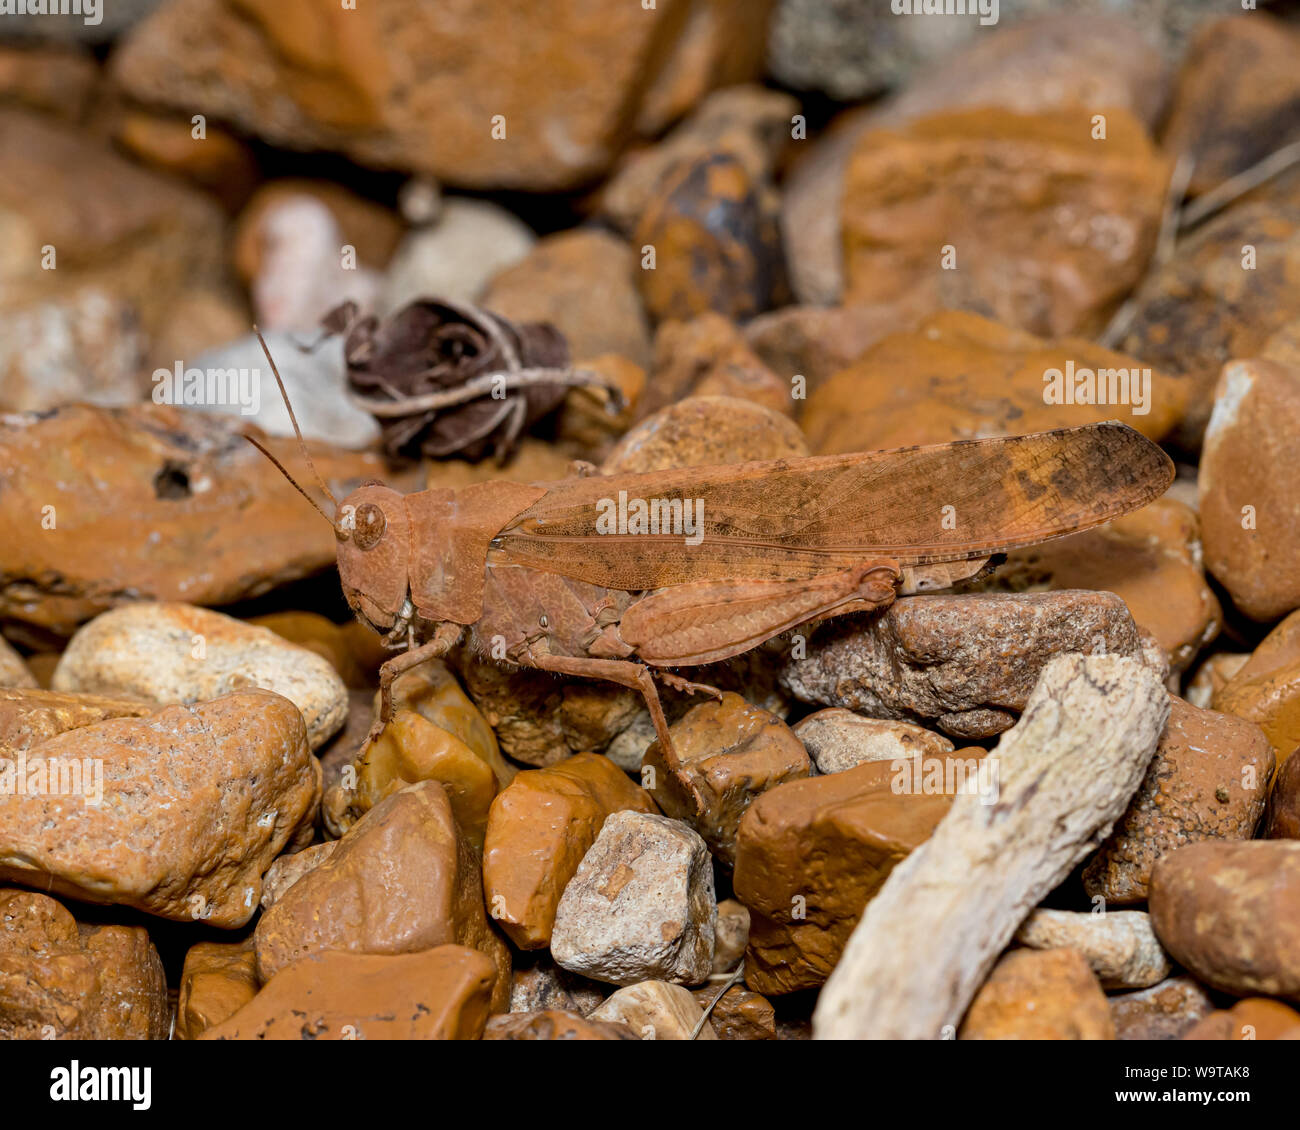 Reddish brown or rust colored Carolina grasshopper camouflaged in its surroundings Stock Photo